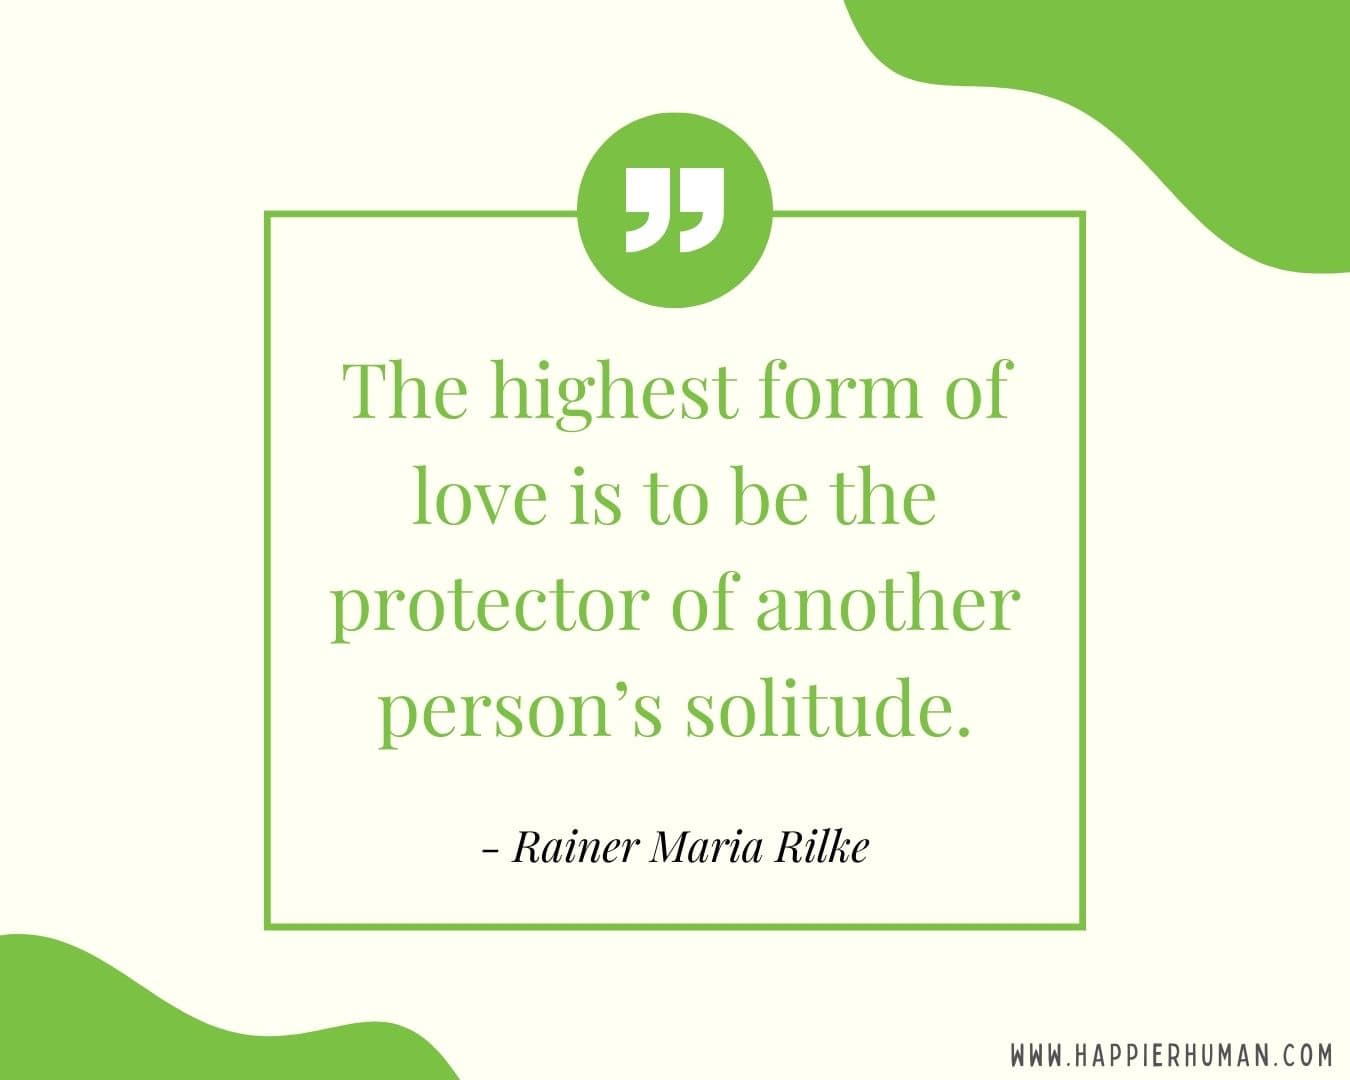 Introvert Quotes - “The highest form of love is to be the protector of another person’s solitude.” – Rainer Maria Rilke